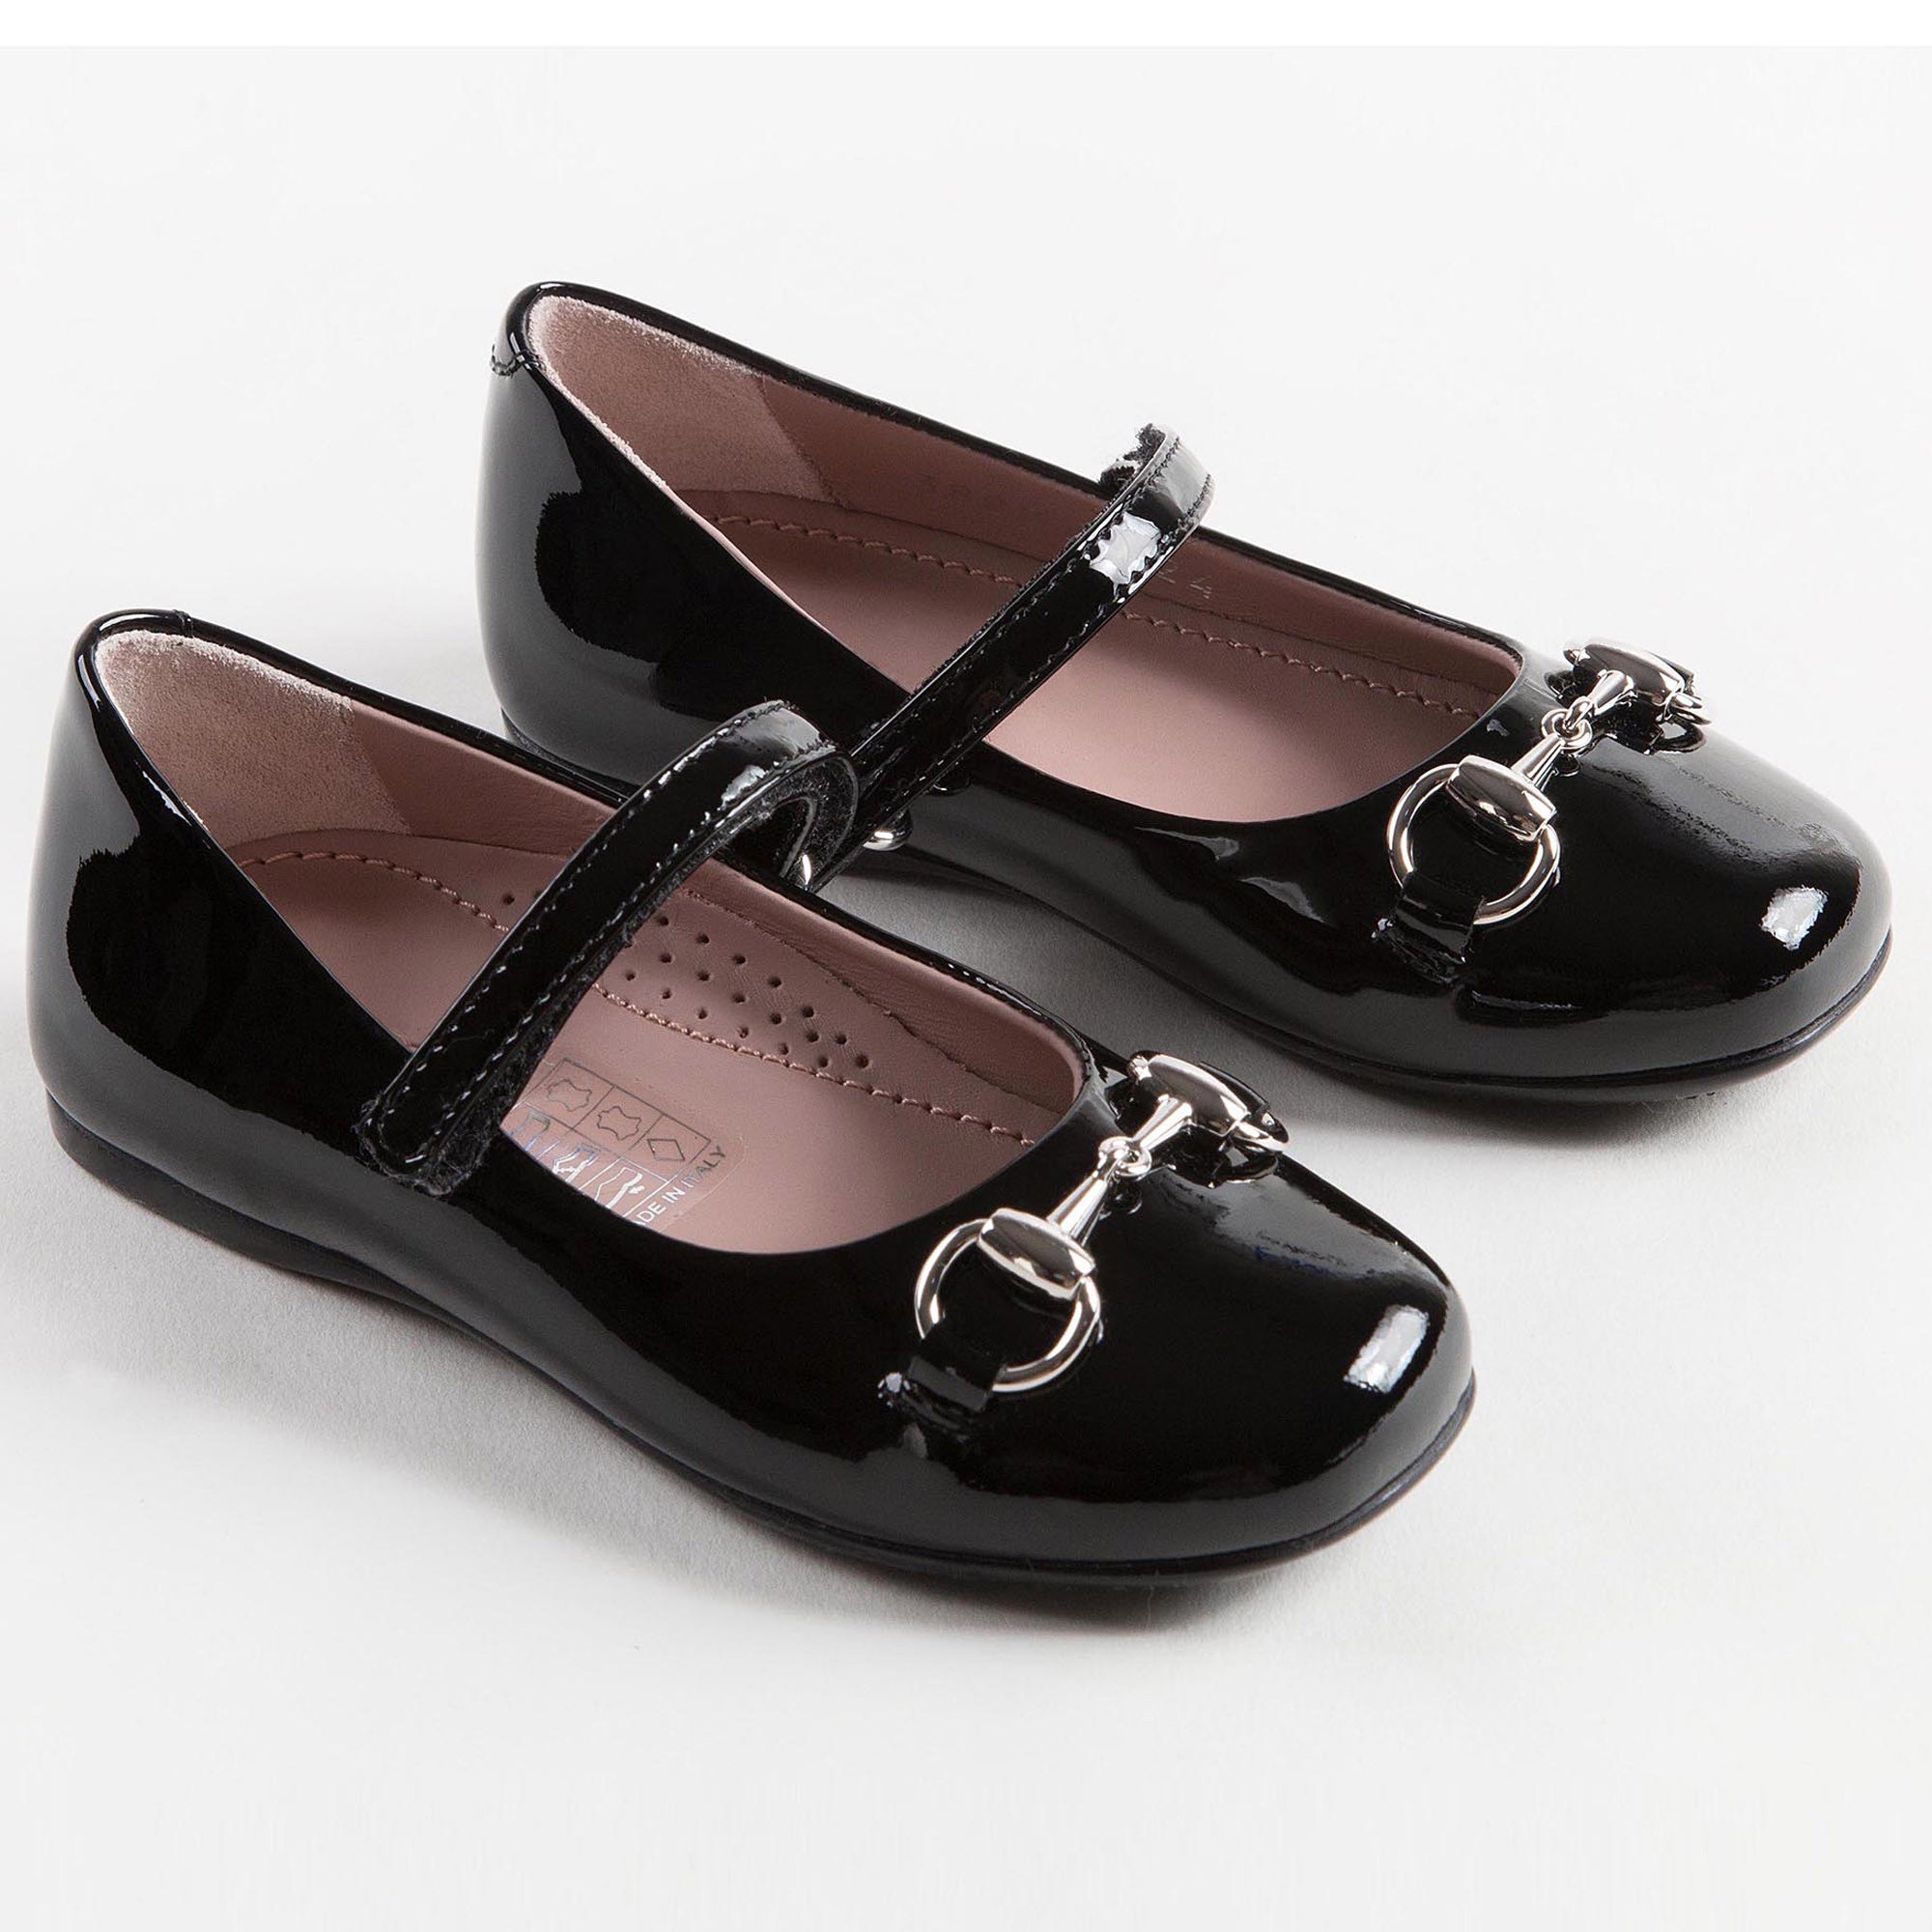 Baby Girls Black Patent Leather Shoes With Horsebit - CÉMAROSE | Children's Fashion Store - 1